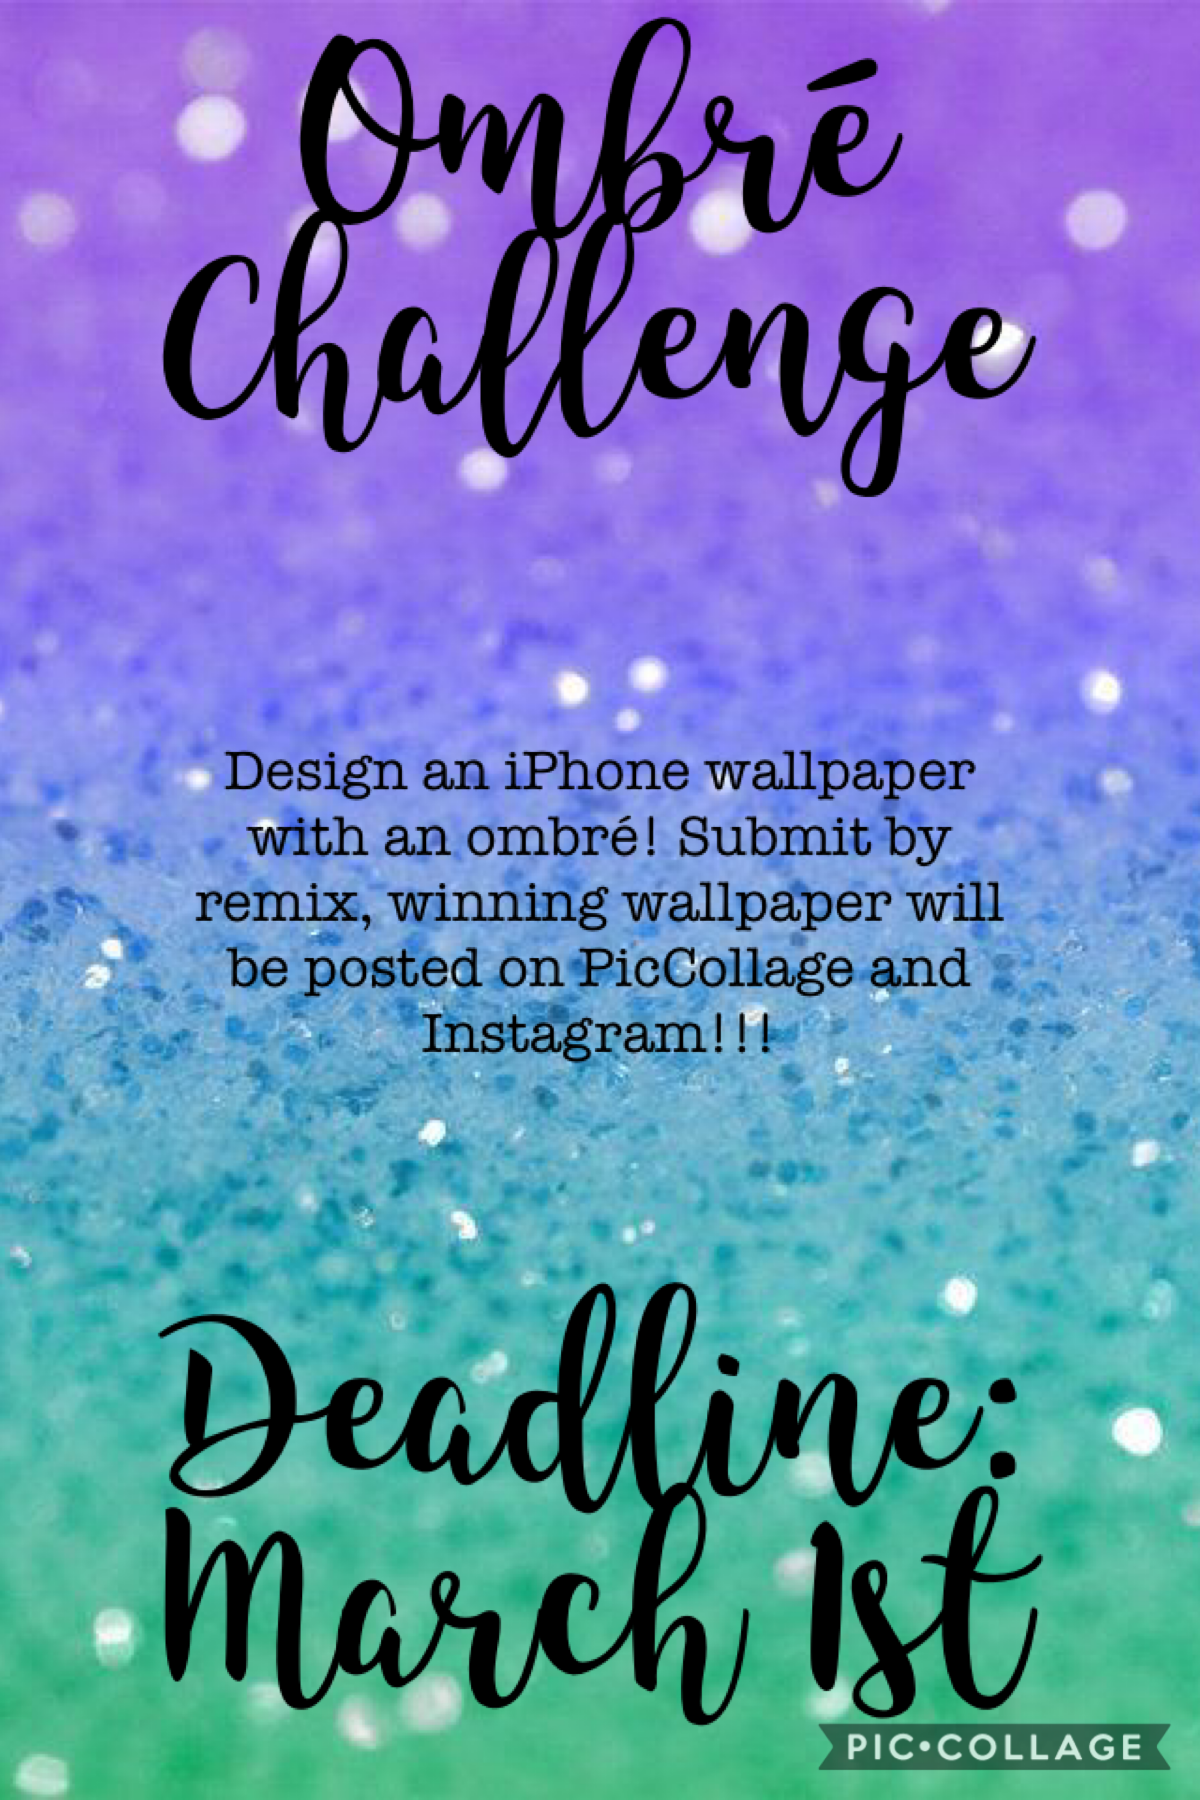 ⭕️#OmbréChallenge!!!

⭕️Design an iPhone wallpaper using an ombré!!!

⭕️Submit yours by remixing it!

⭕️Winning wallpaper will be posted on PicCollage and Instagram

⭕️Deadline: March 1st, 2021